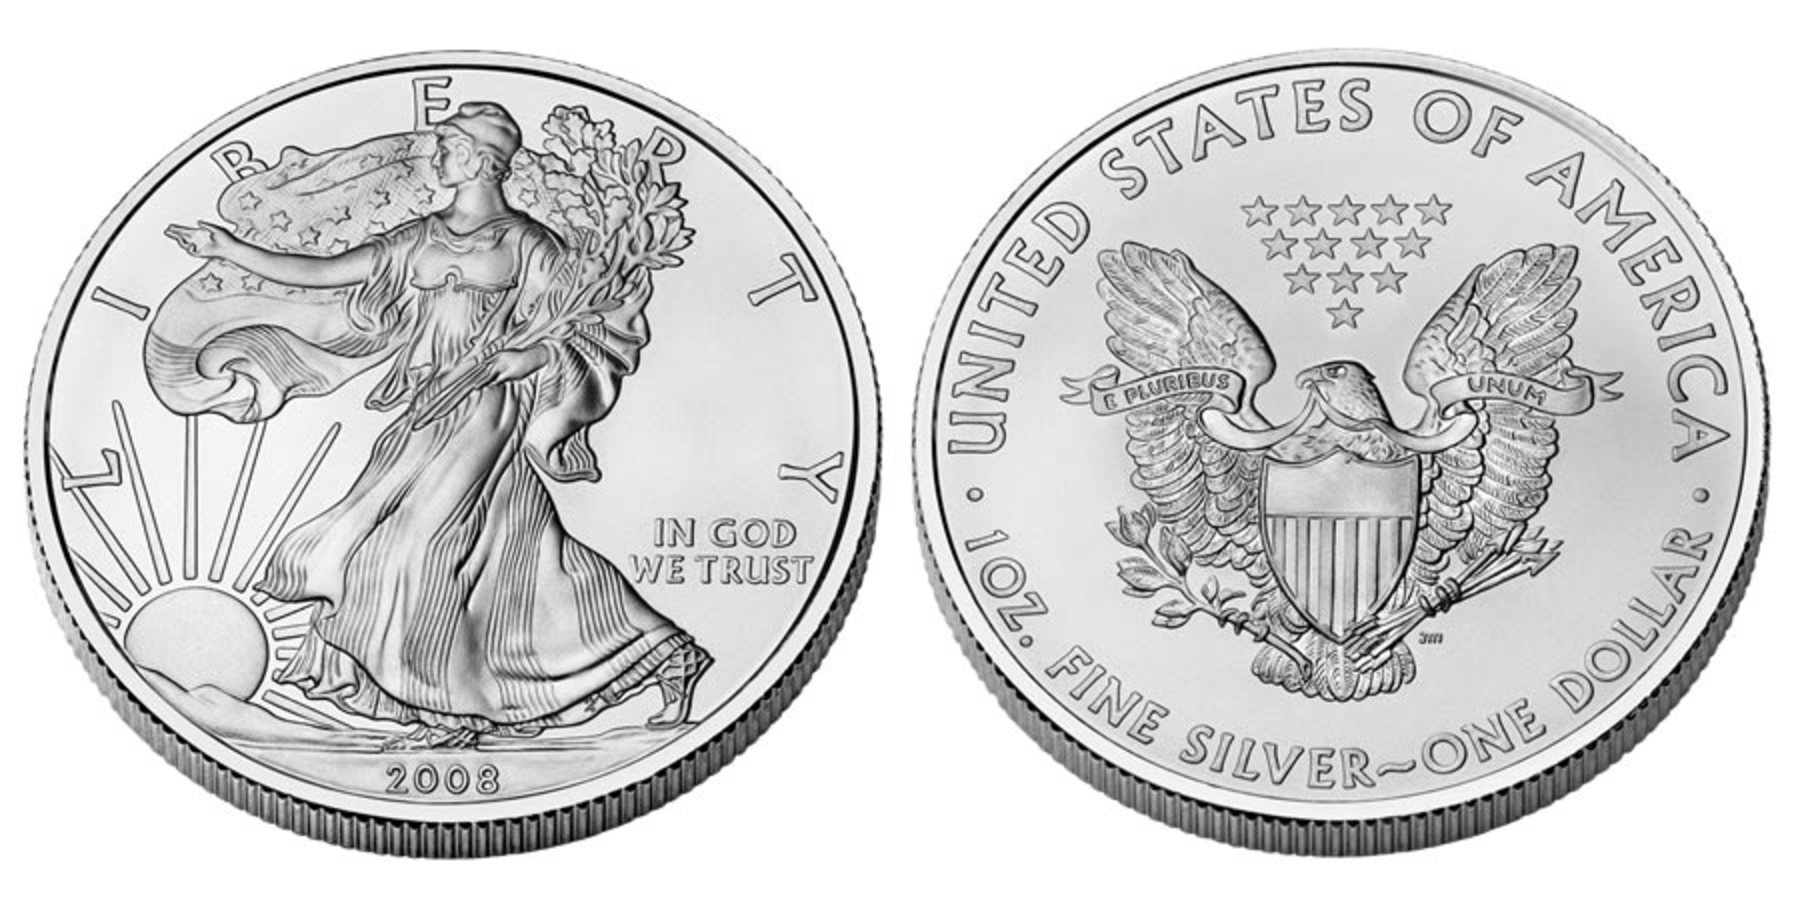 Silver American Eagle Bullion Coins - US Coin Prices and Values ...